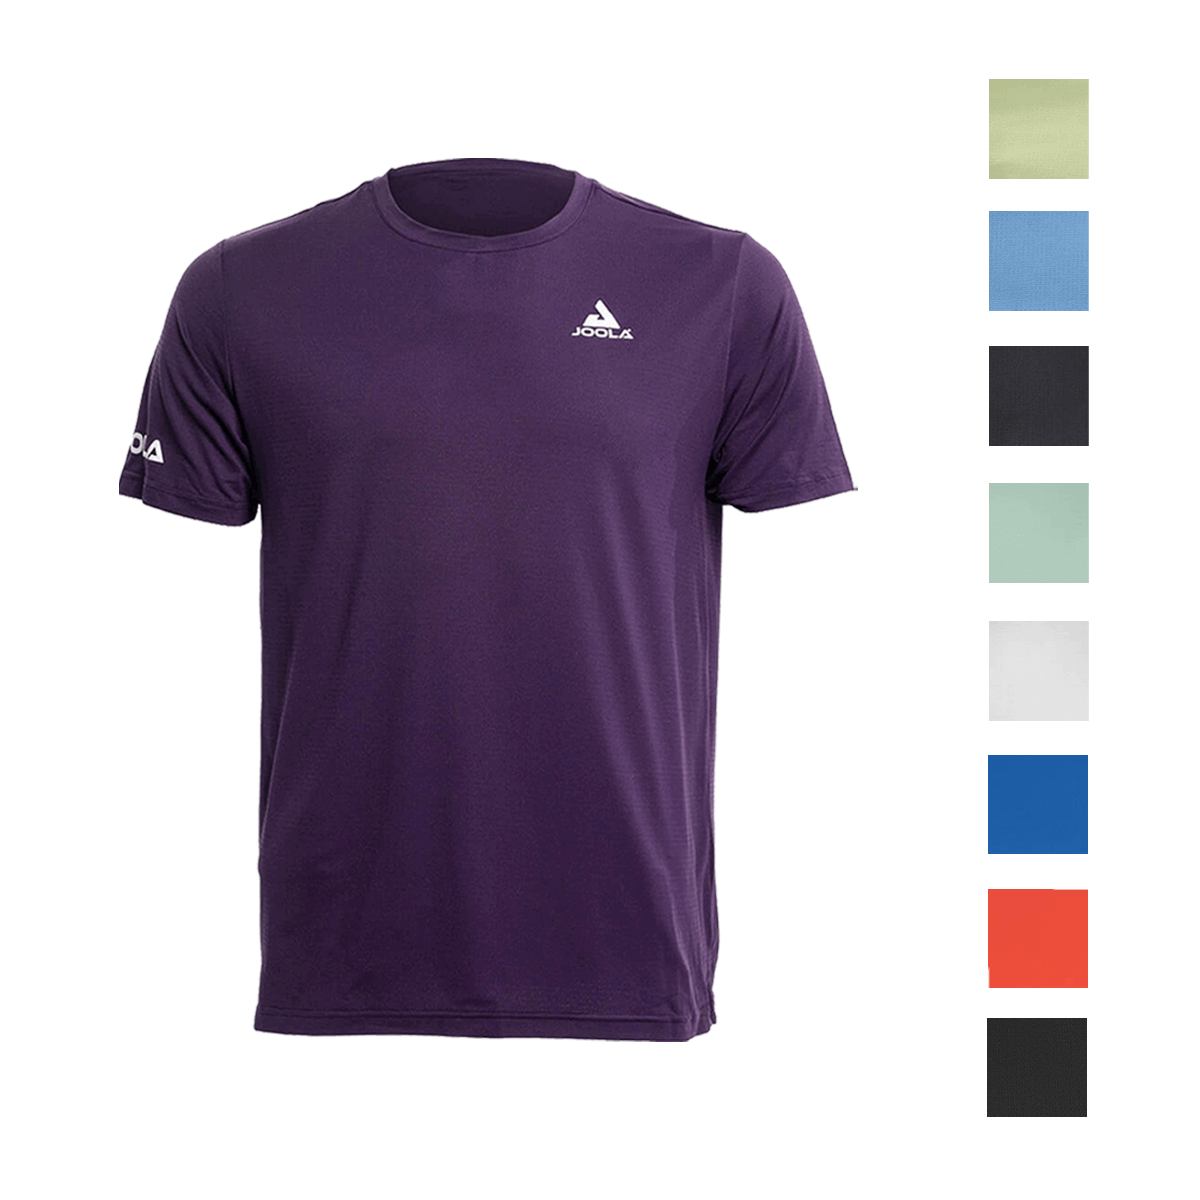 Product photo of the JOOLA Ben Johns React T-Shirt in Blackberry Cordial (Left), thumbnail swatches of Mint Green, Carolina Blue, Blackberry Cordial, Dusty Aqua, White, Nobility Blue, Hot Coral, Blue Graphite (Right)